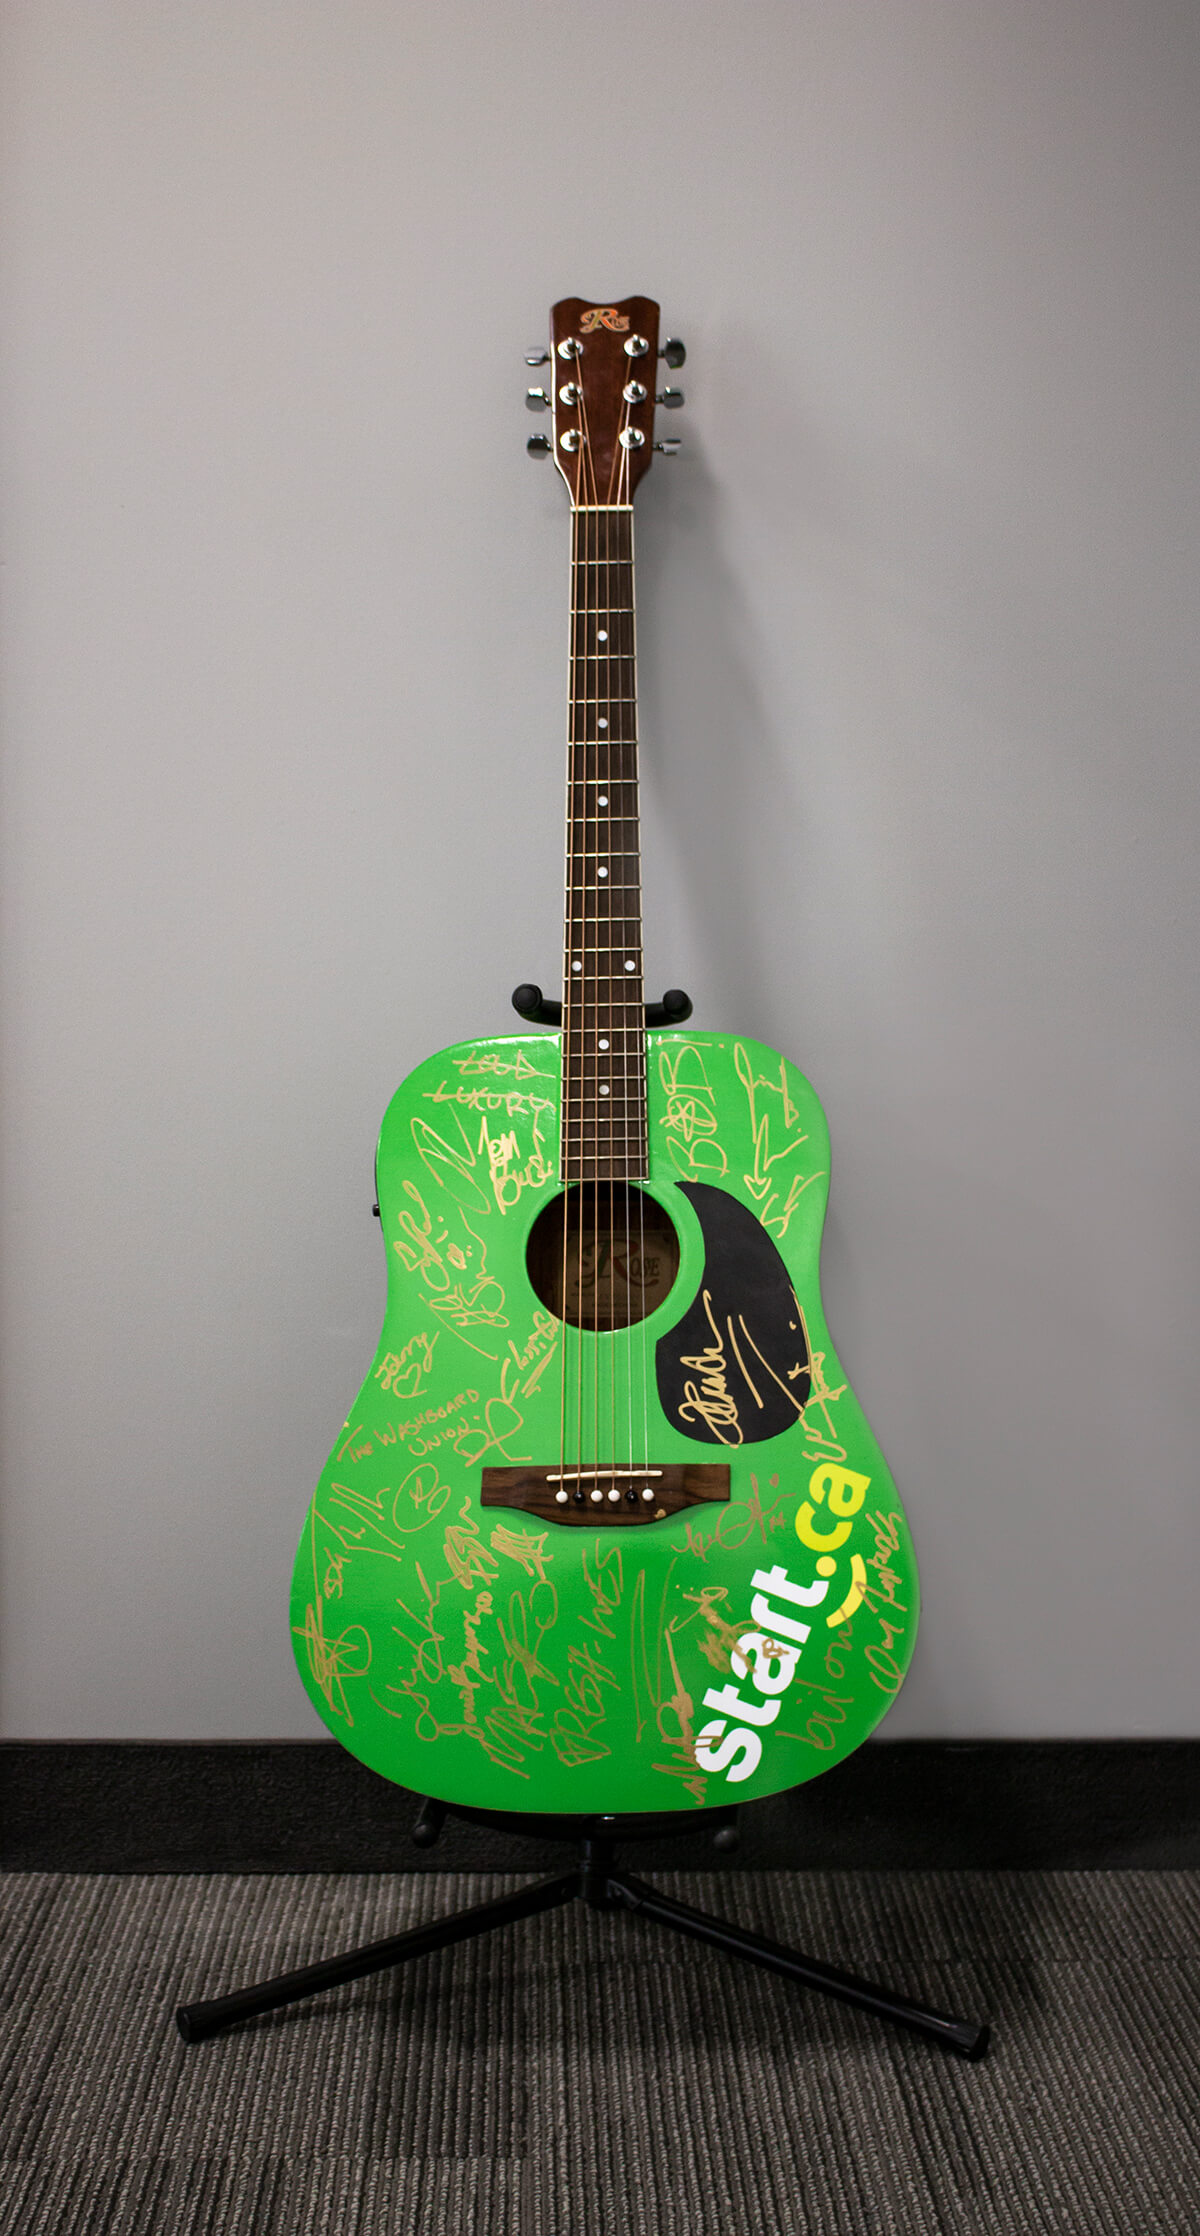 Fully autographed 2019 JUNOS Start.ca green guitar